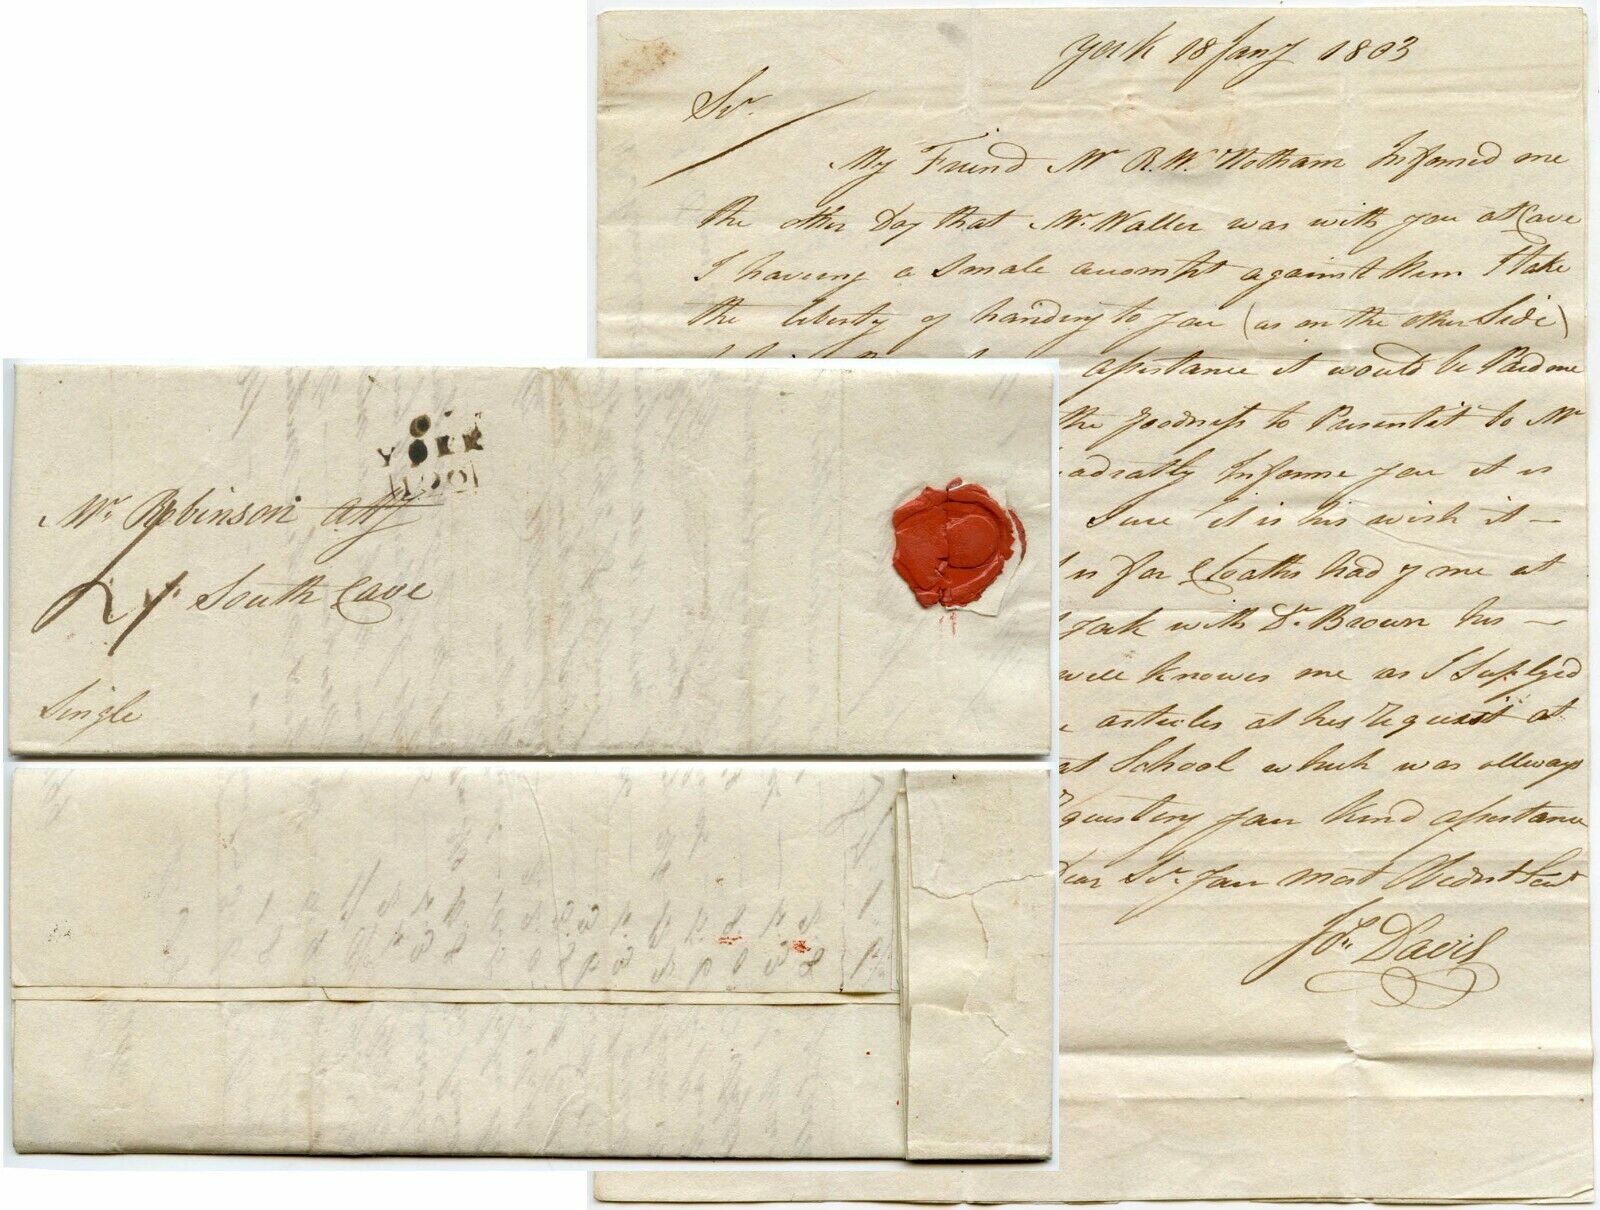 1803 LETTER YORK 190 MILEAGE to ROBINSON SOUTH CAVE SIGNED J L DAVIS